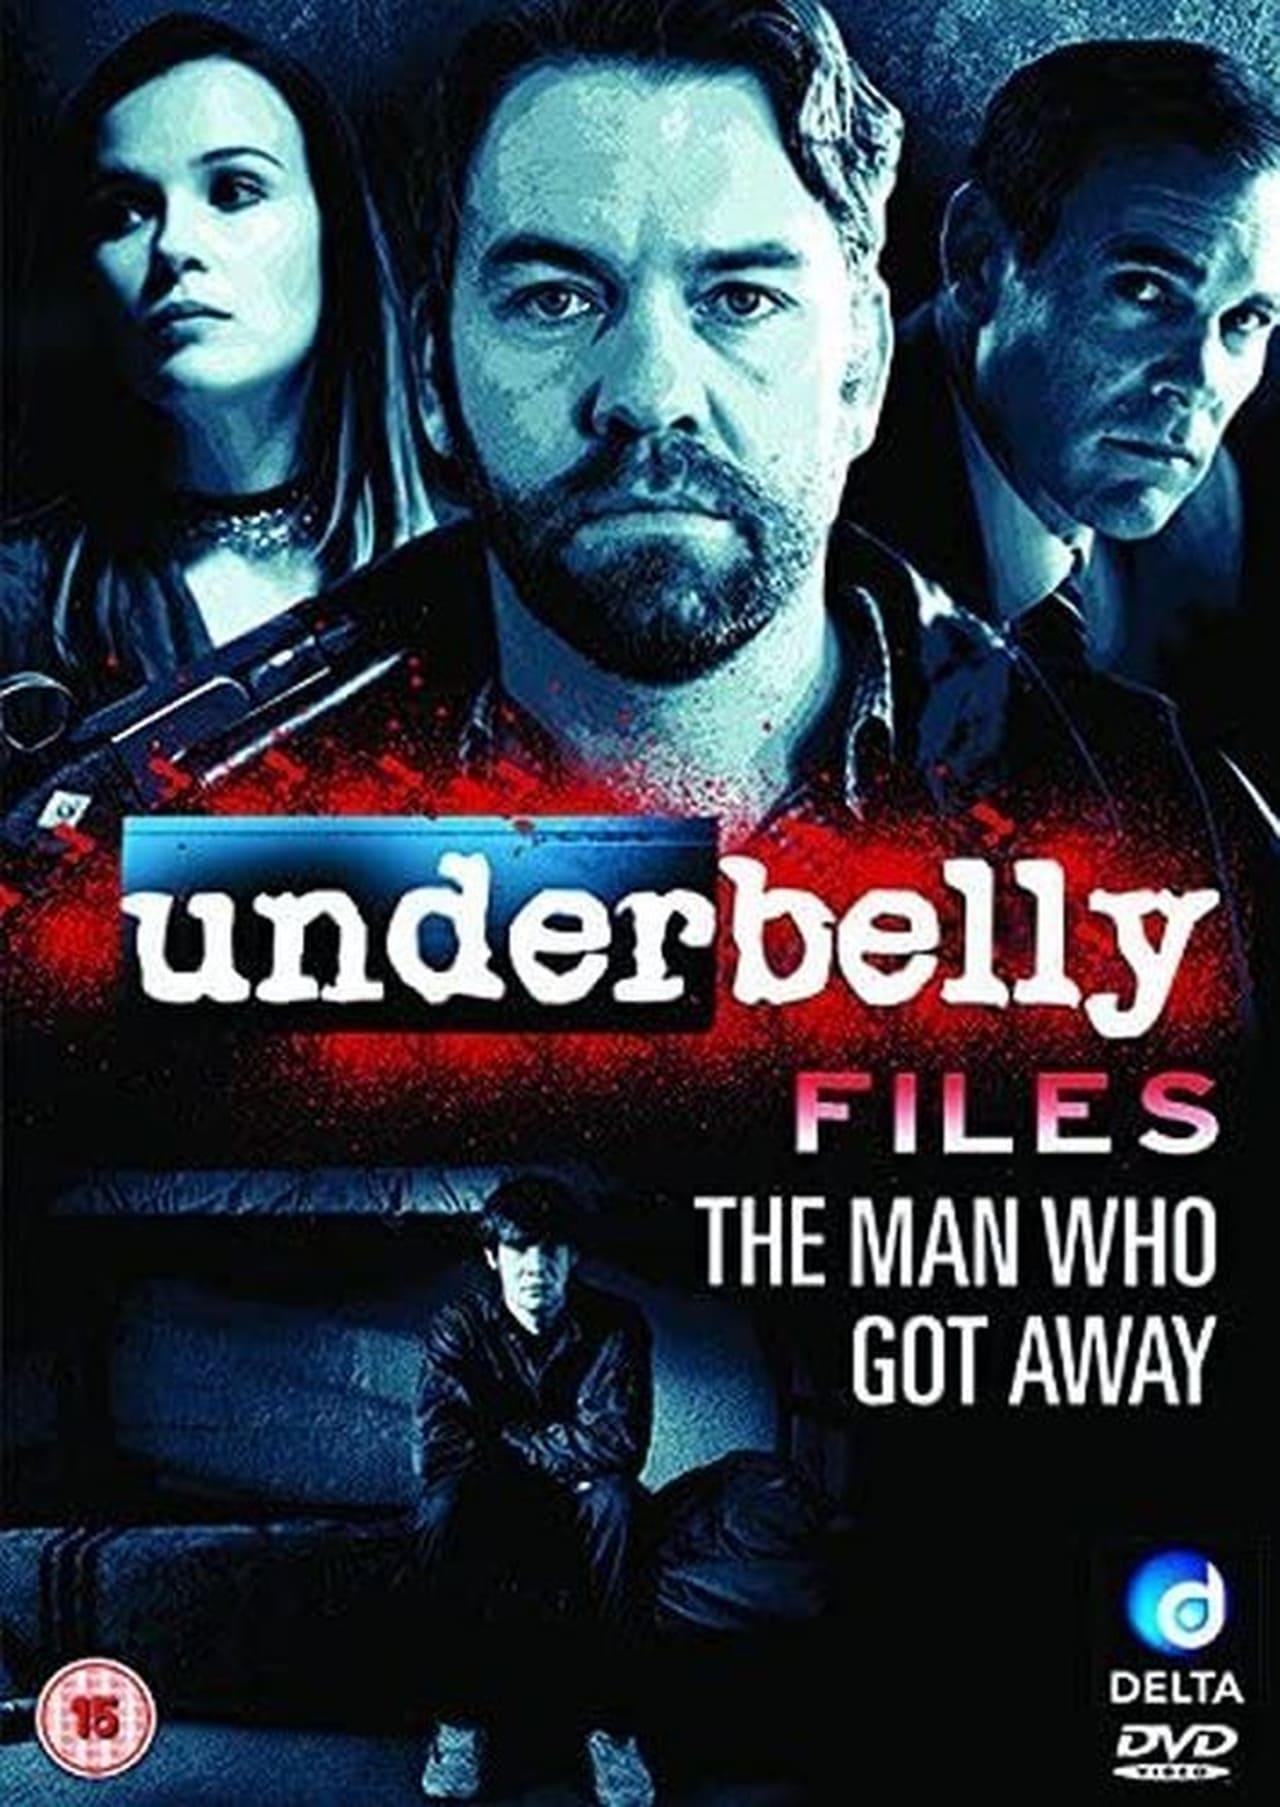 Underbelly Files: The Man Who Got Away poster